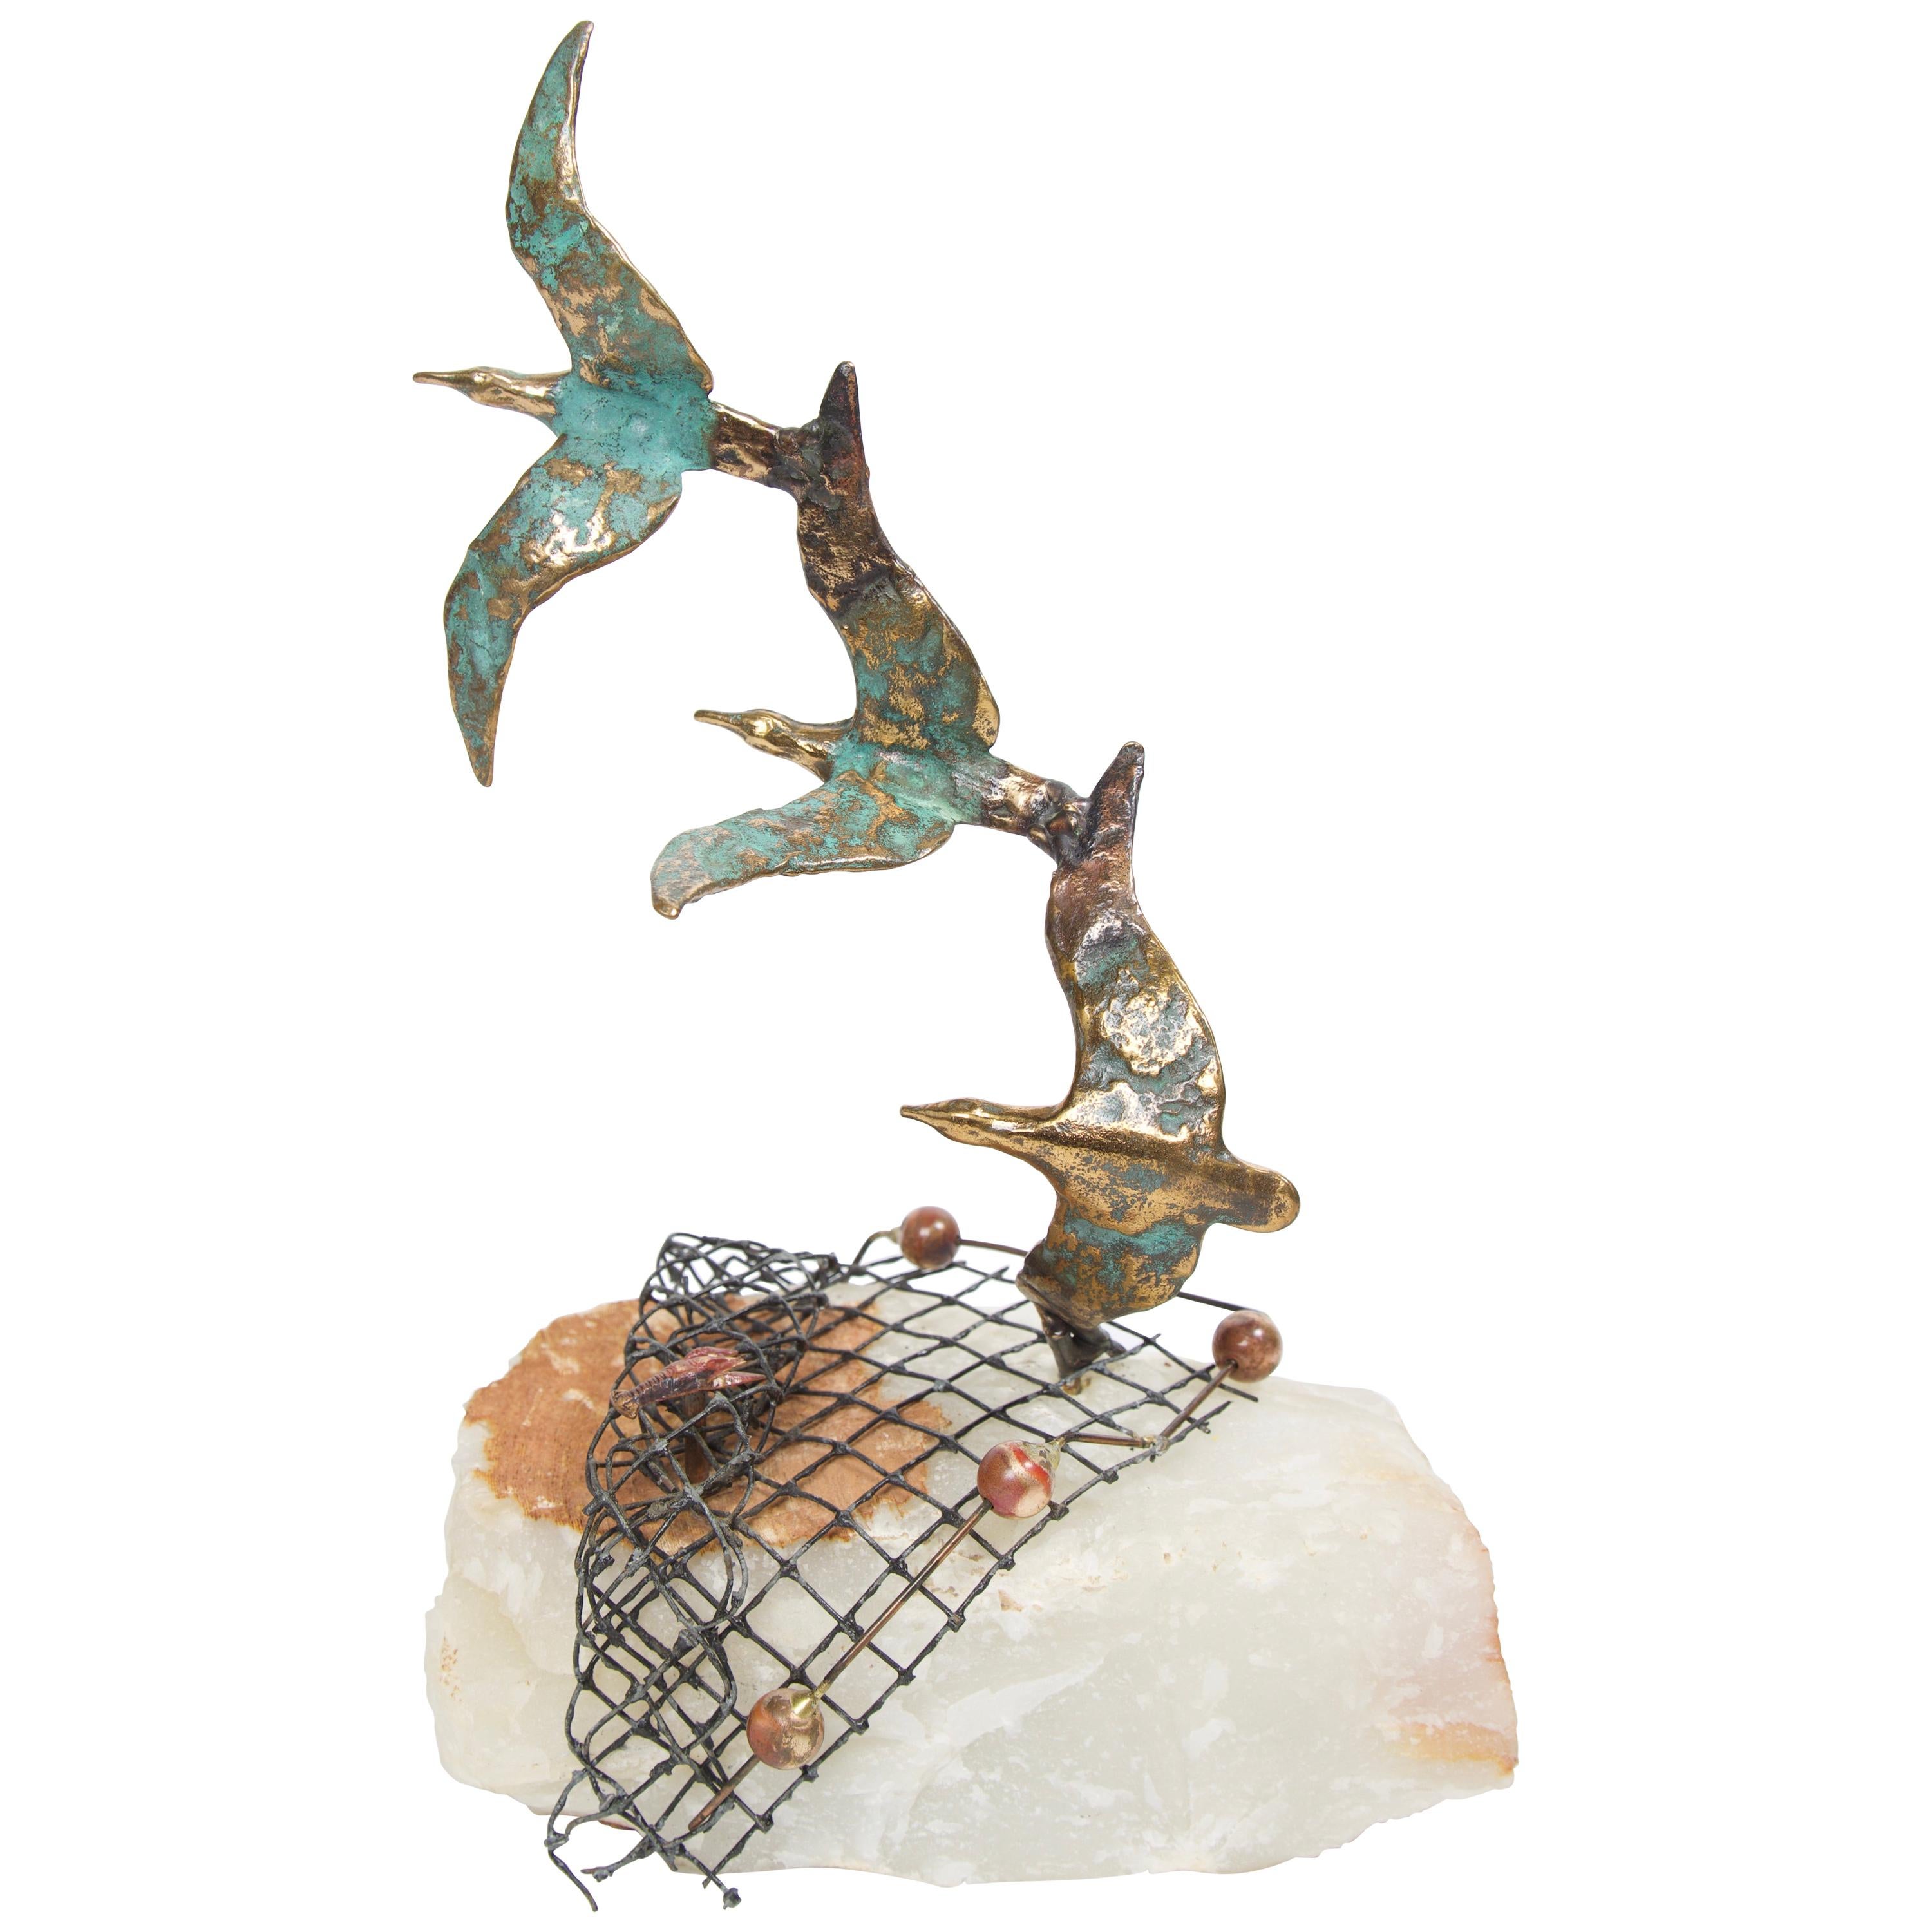 Birds in Flight off Coast Sculpture on Onyx Stone by Curtis Jere